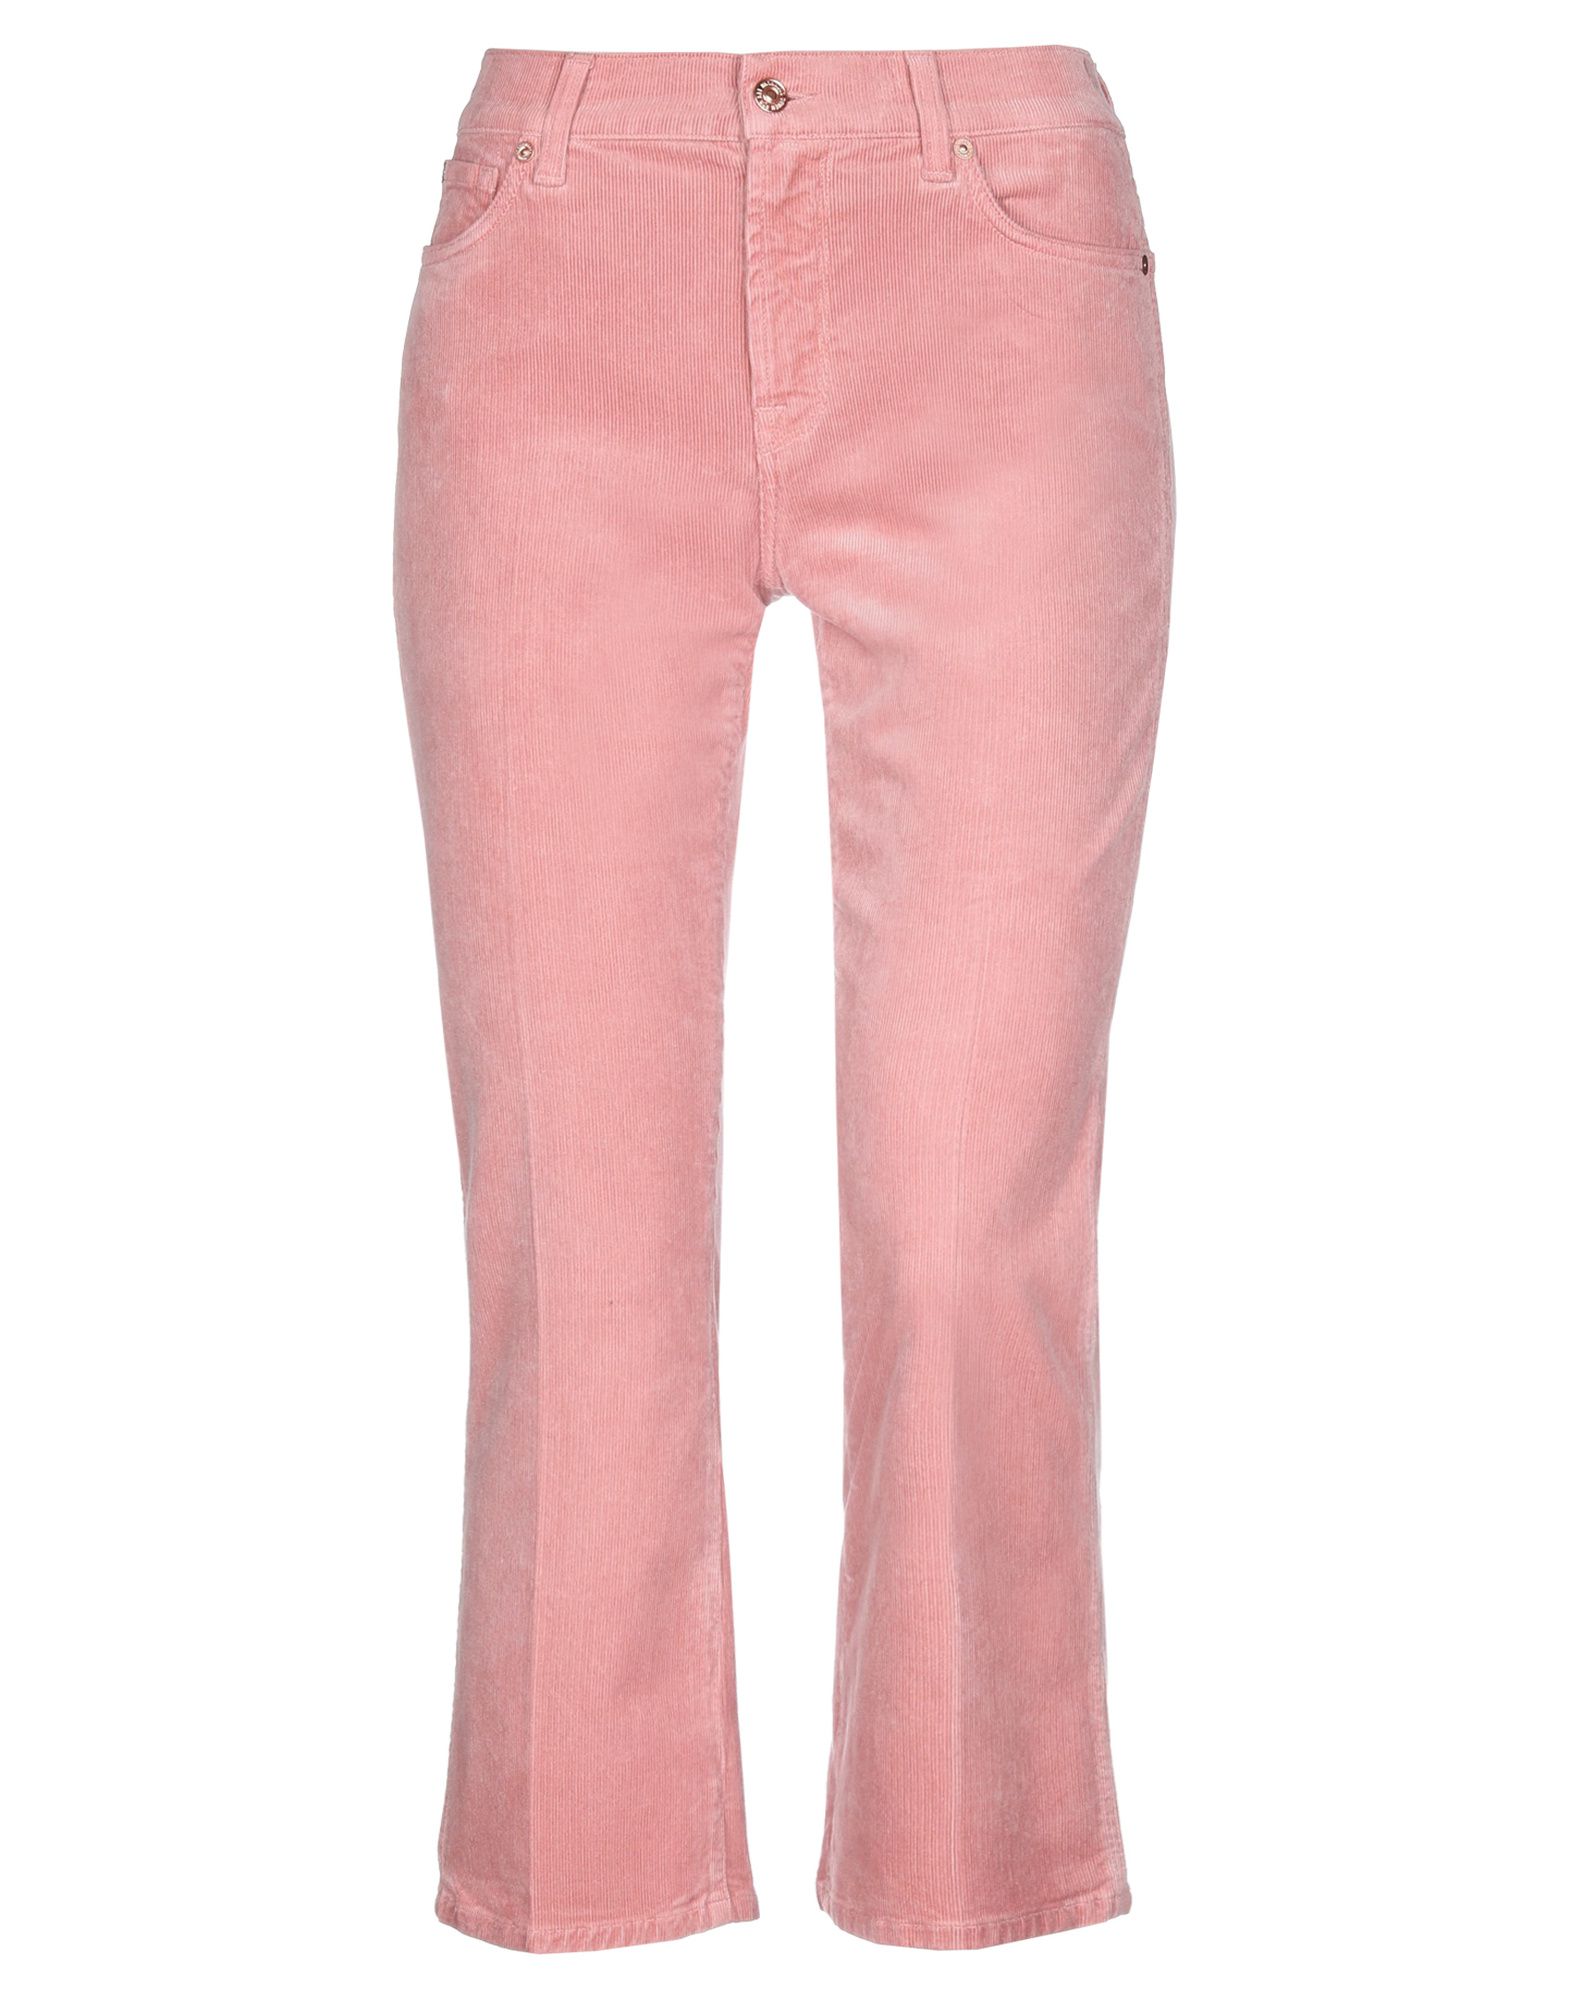 Shop 7 For All Mankind Woman Pants Pink Size 31 Cotton, Modal, Polyester, Polyurethane